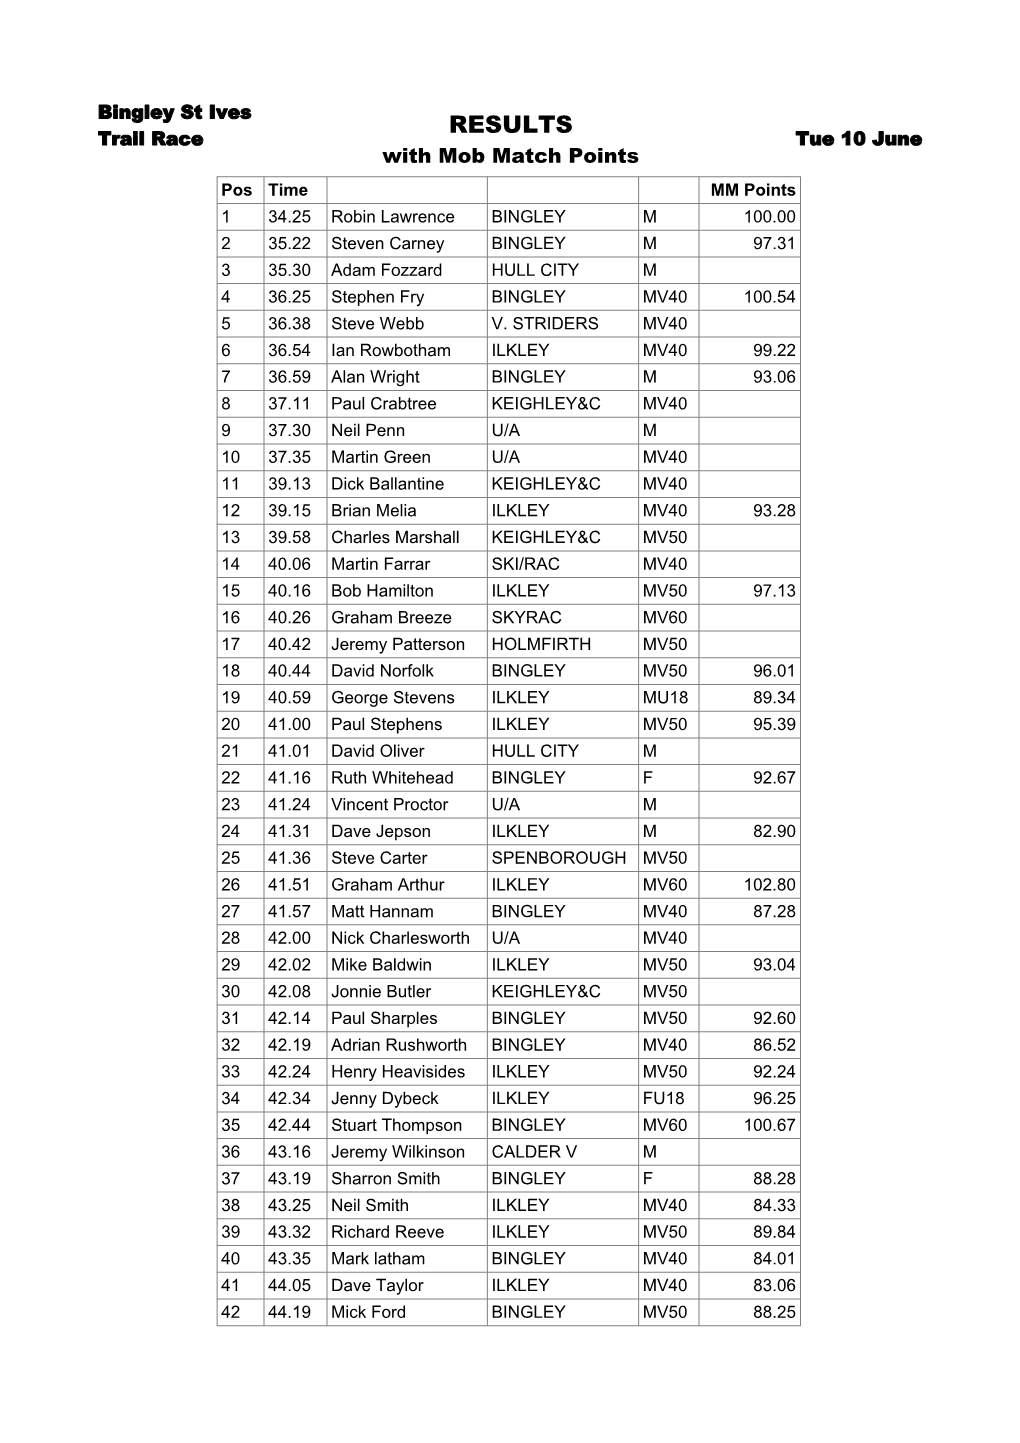 Bingley St Ives Trail Race Results with Mob Match Points